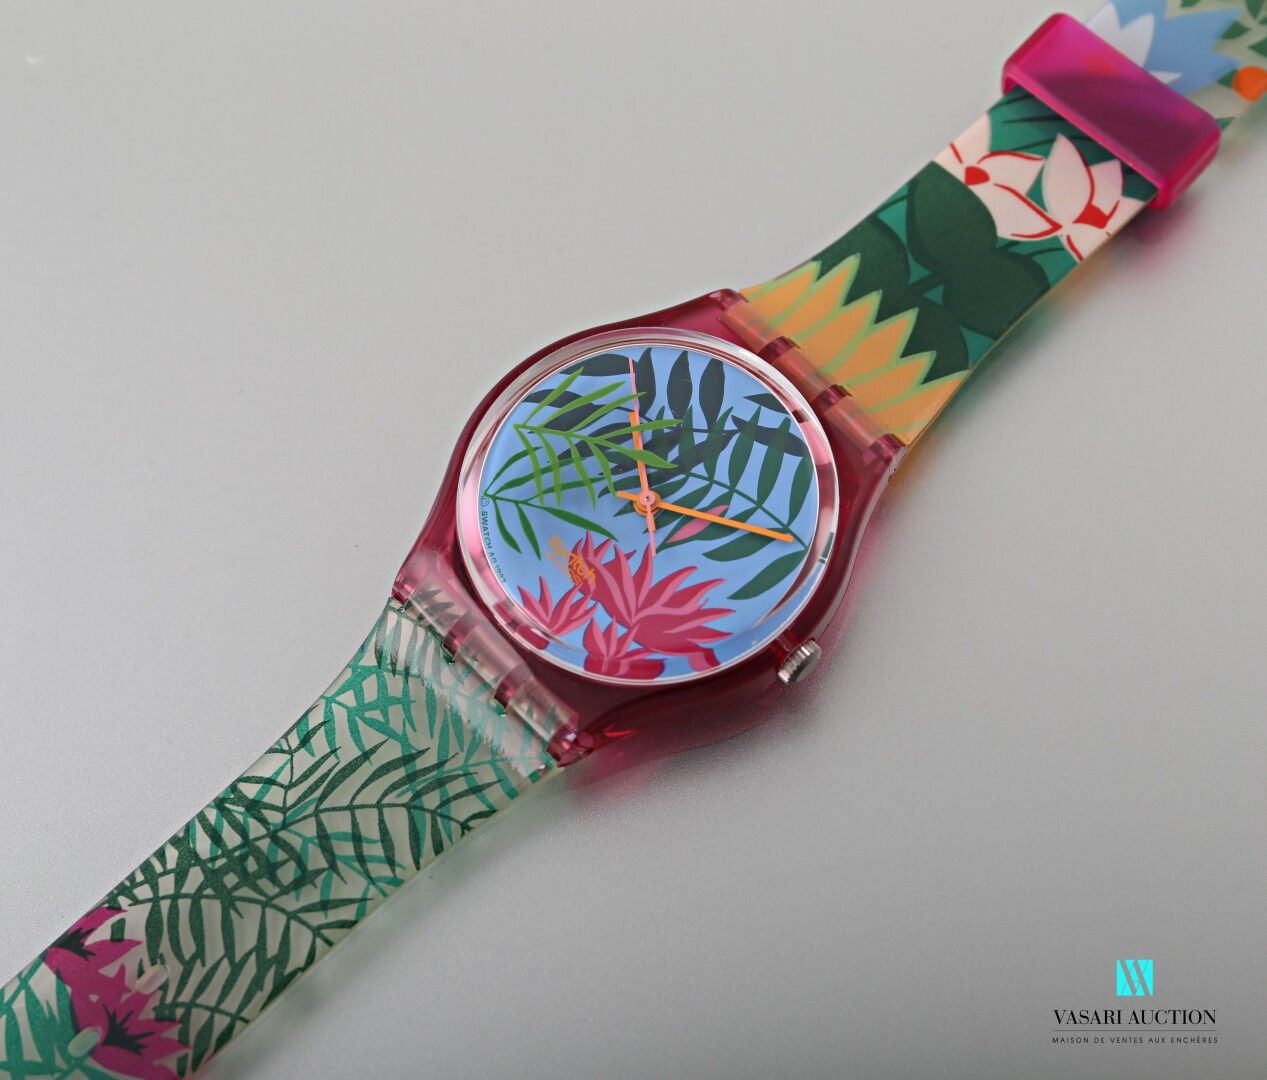 Null SWATCH - FLORAL STORY - 1994

Plastic case and bracelet.

Movement with qua&hellip;